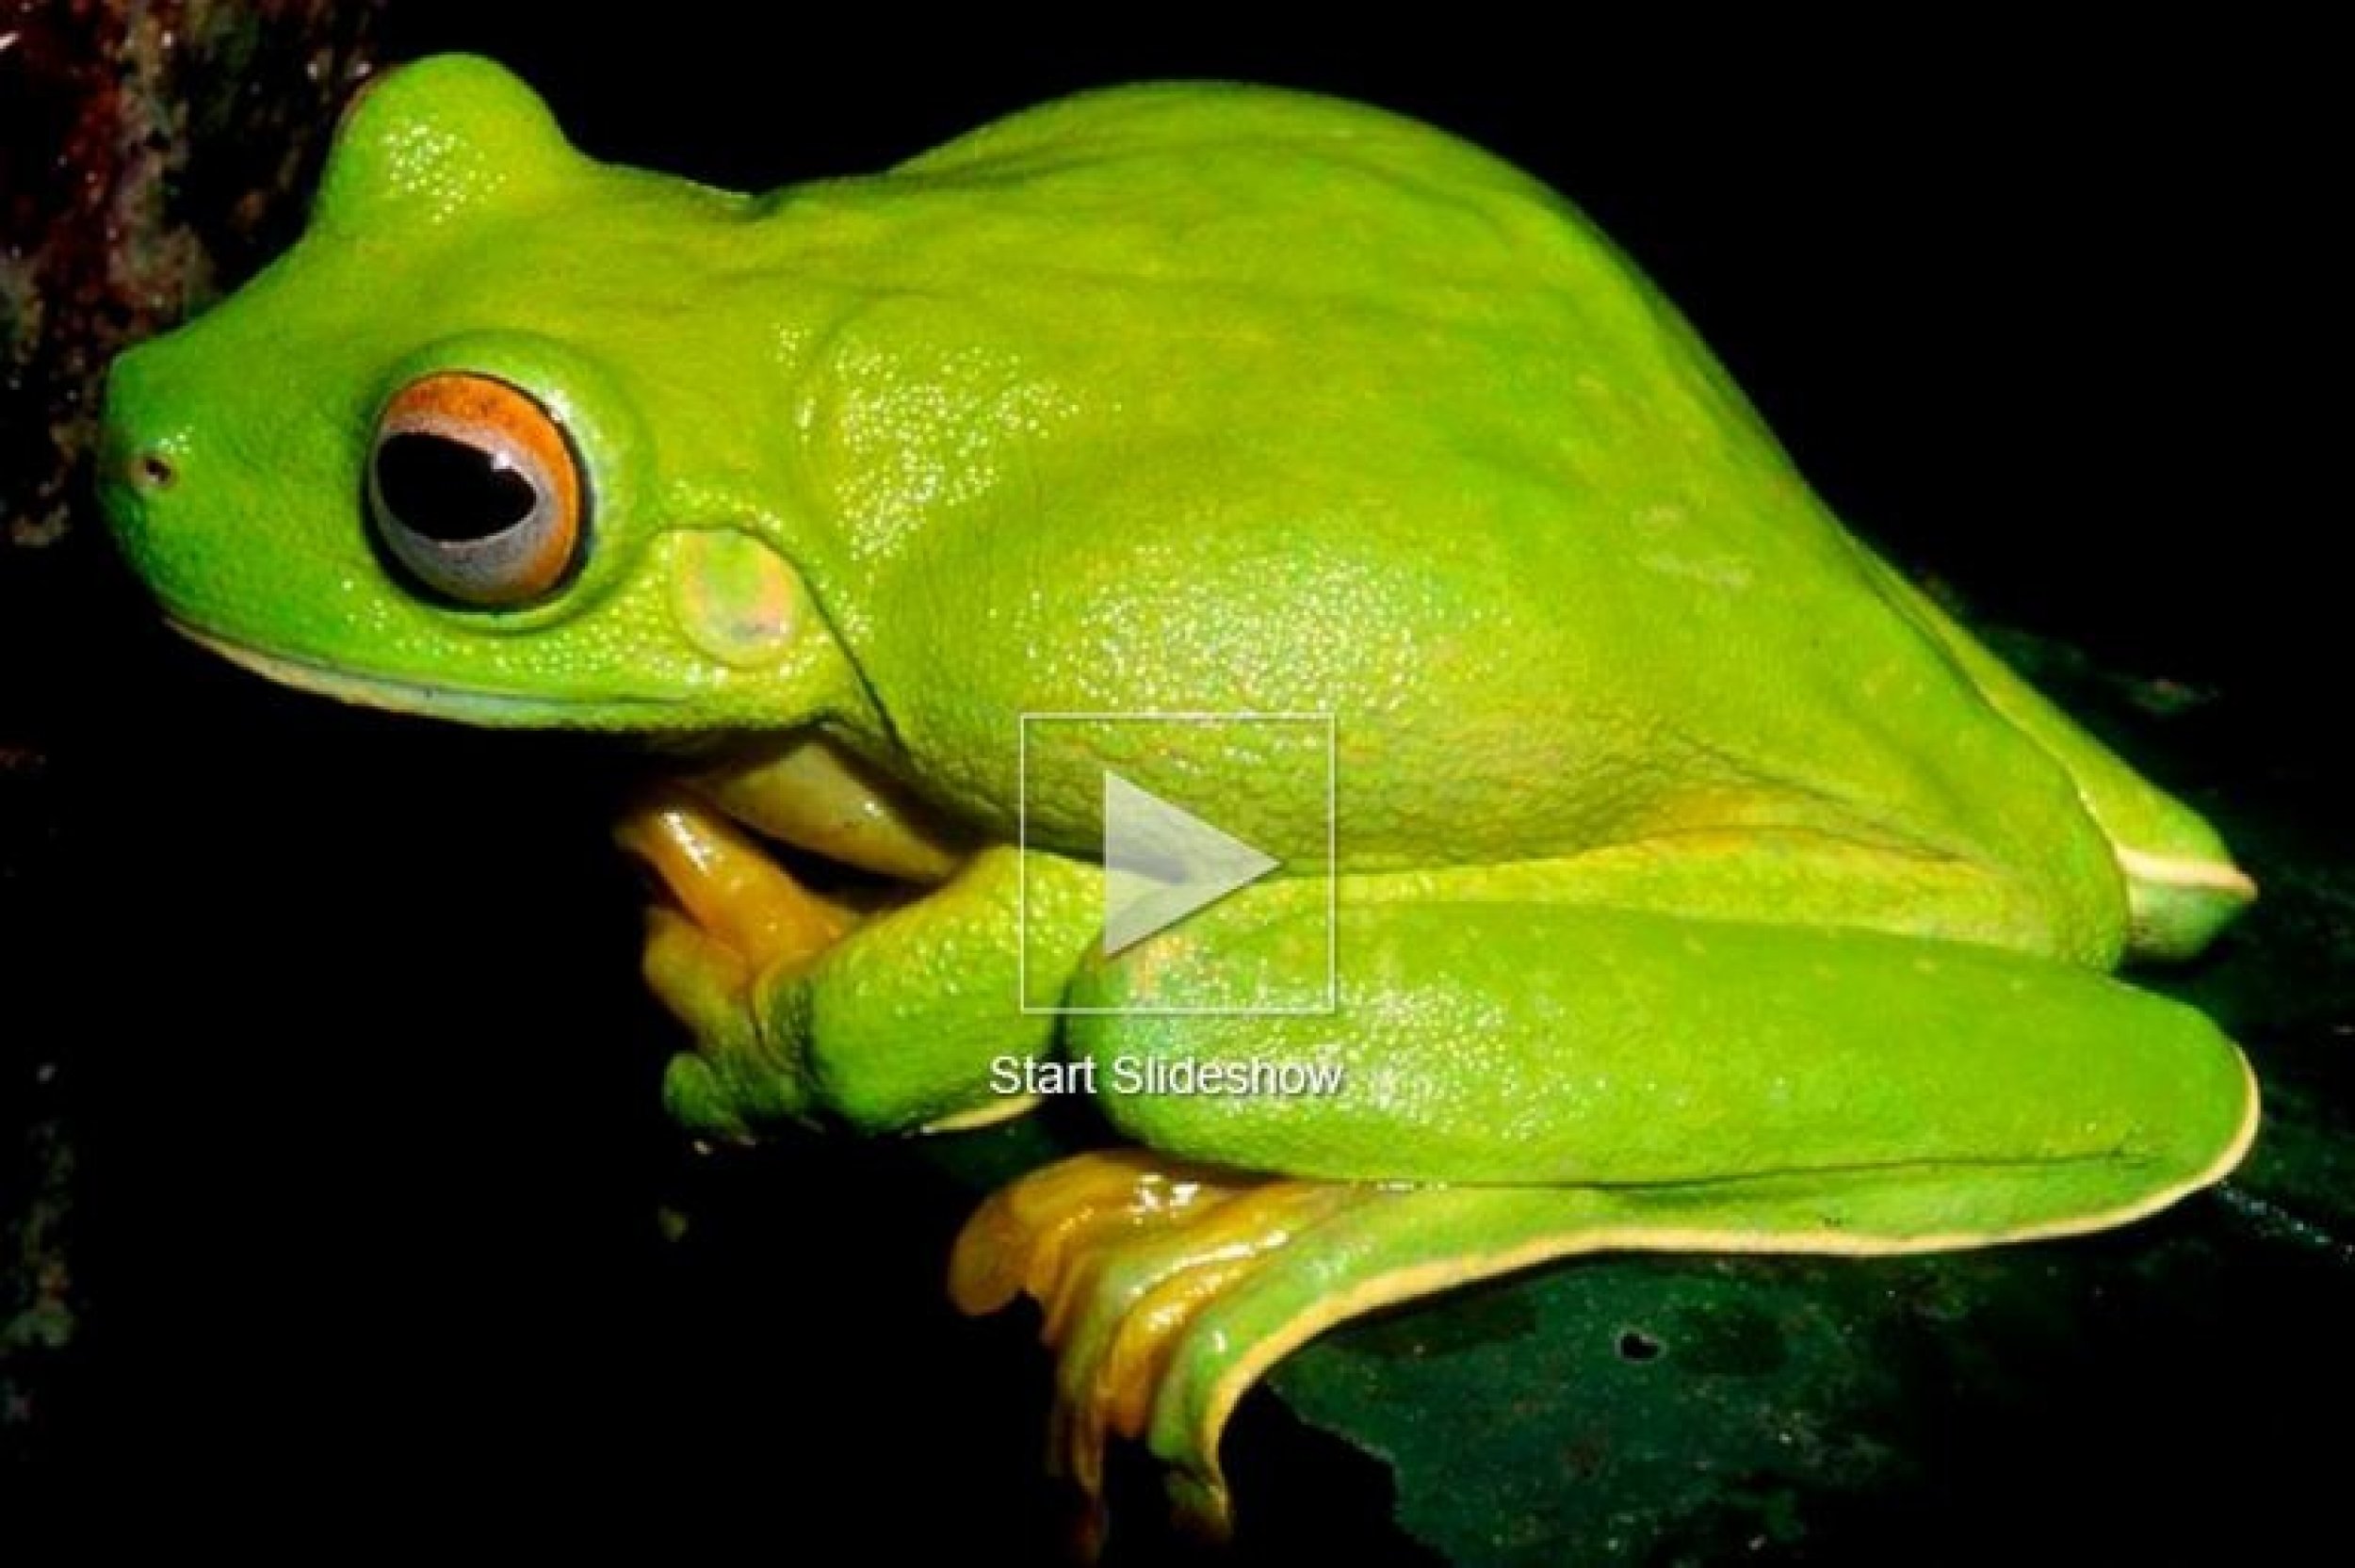 The large green tree-dwelling frog, Litoria dux